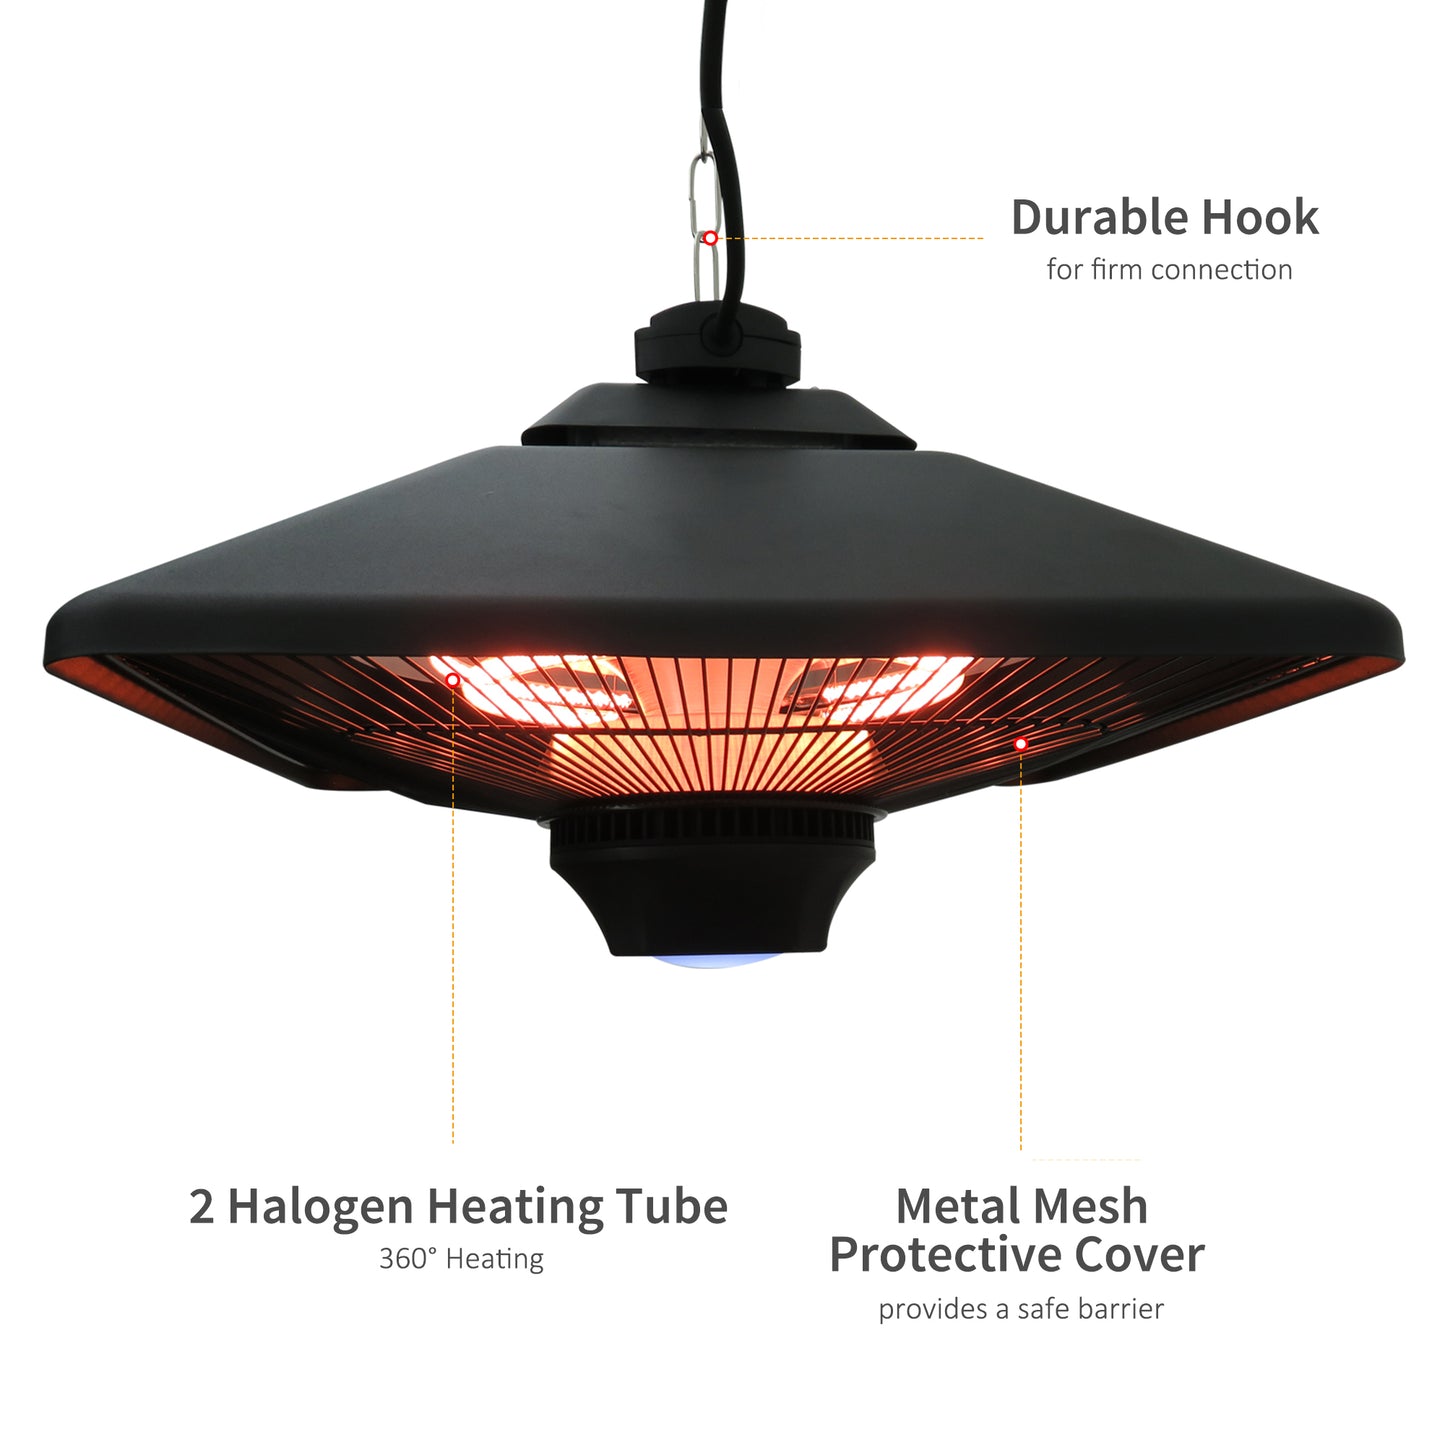 Outsunny 2kw Outdoor Hanging Ceiling Mounted Aluminium Halogen Electric Heater LED Garden Patio Warmer w/Remote Control